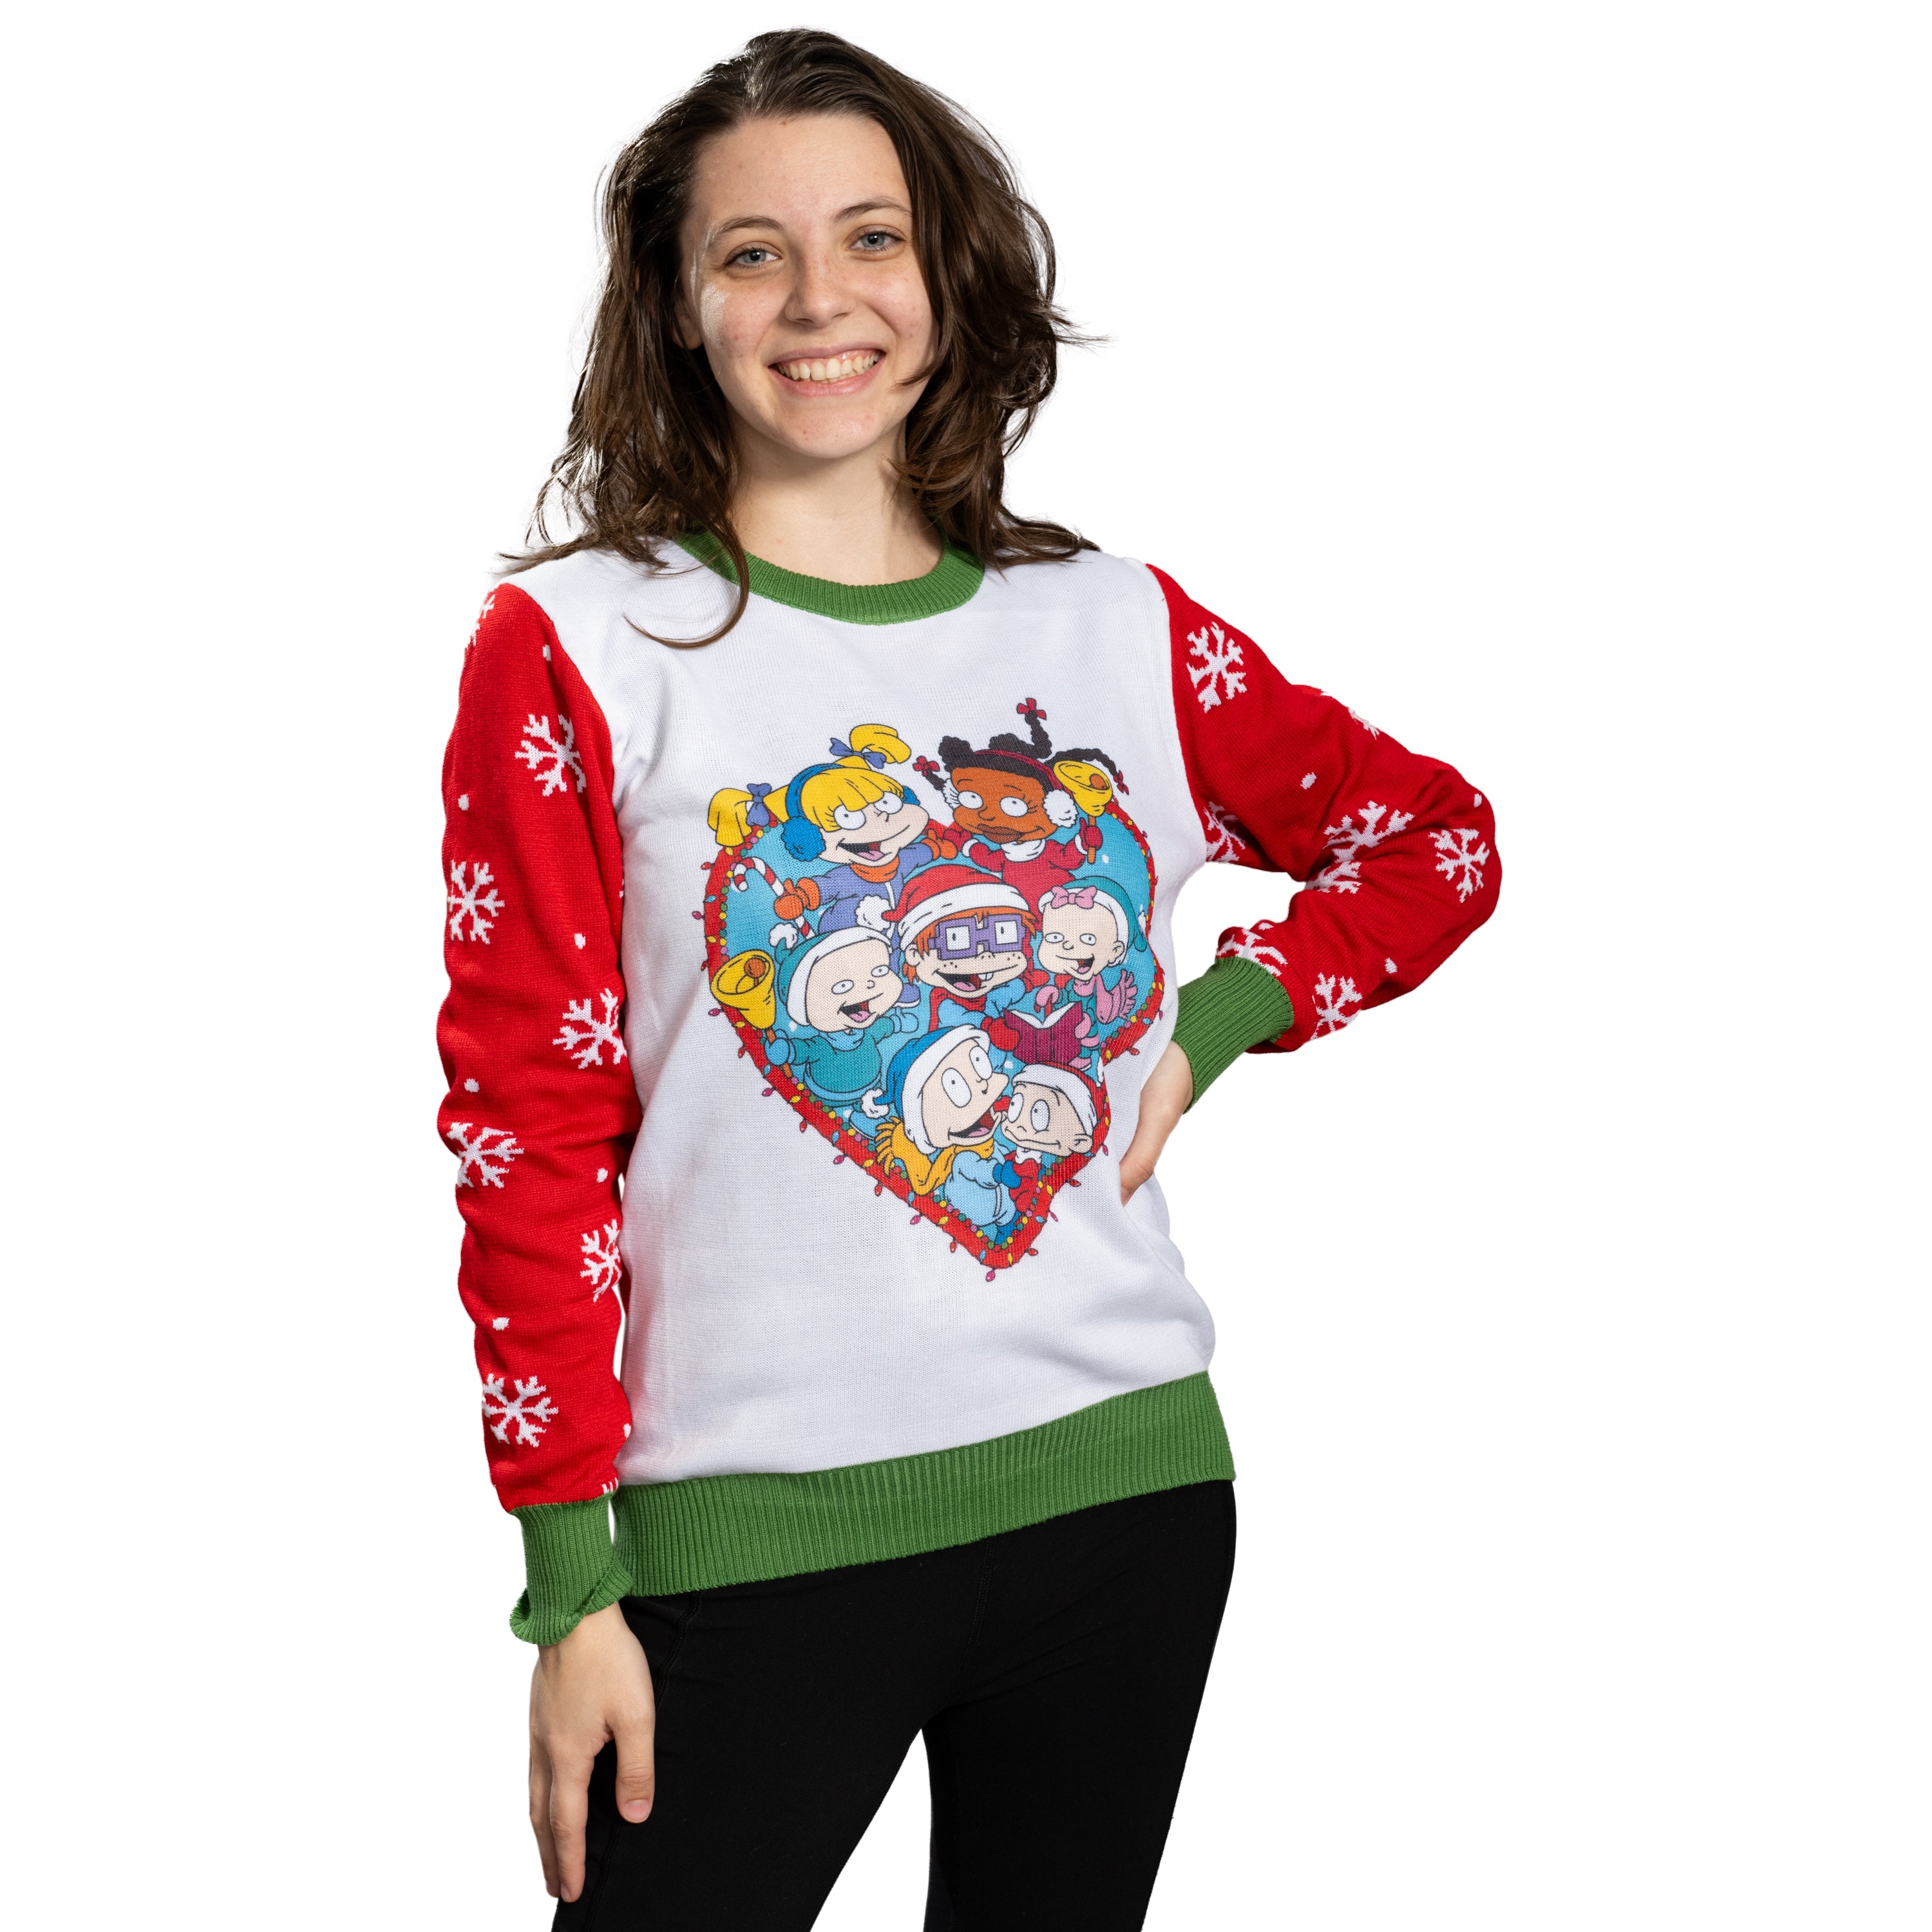 Rugrats "Winter Love" Christmas Sweater